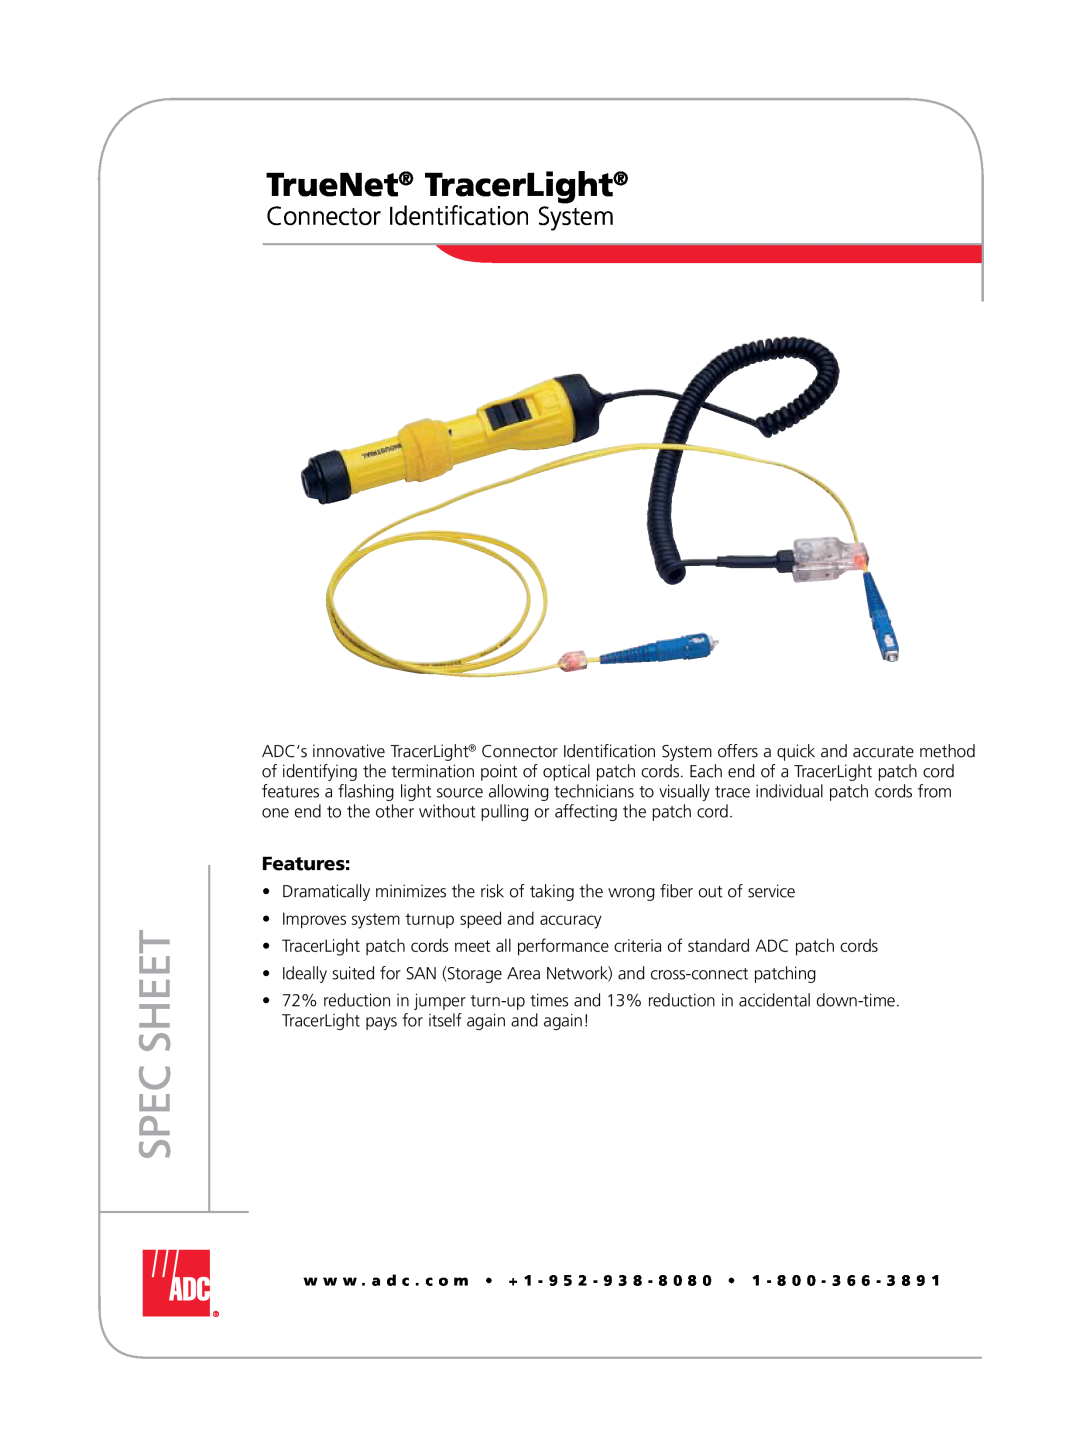 ADC TrueNet TracerLight manual Connector Identification System, Spec Sheet, Features 